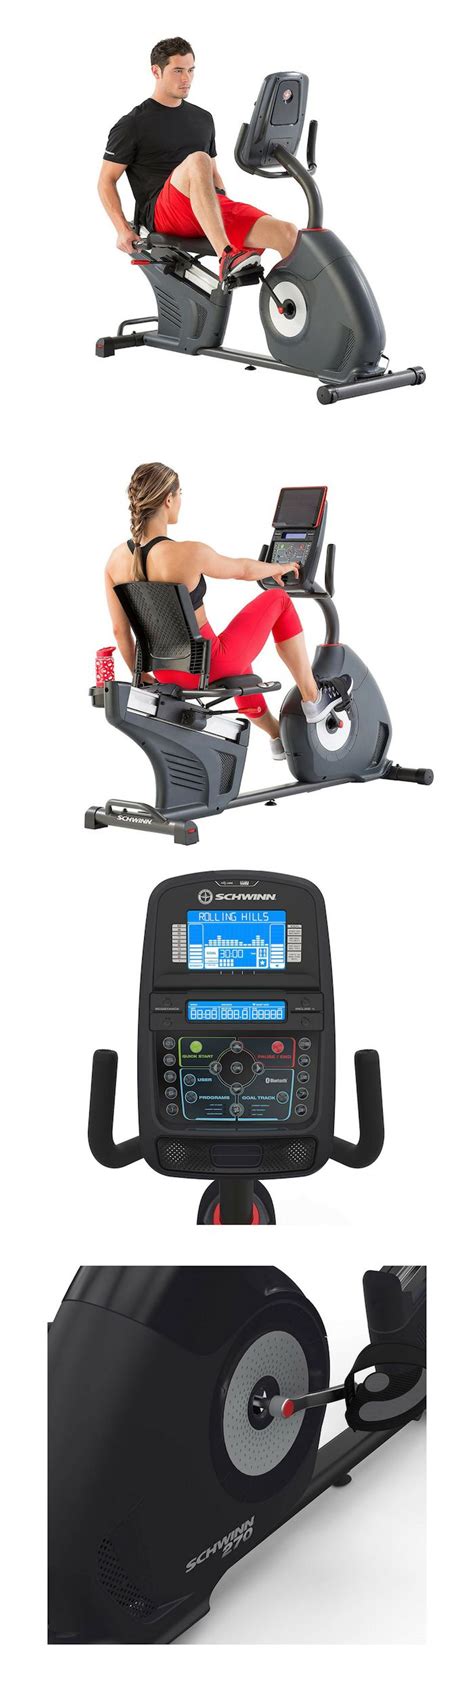 Bluetooth connectivity, syncs with the schwinn trainer app and other apps for fitness tracking. With the Schwinn 270 Recumbent Bike, cardio workouts are anything but routine. From dozens of p ...